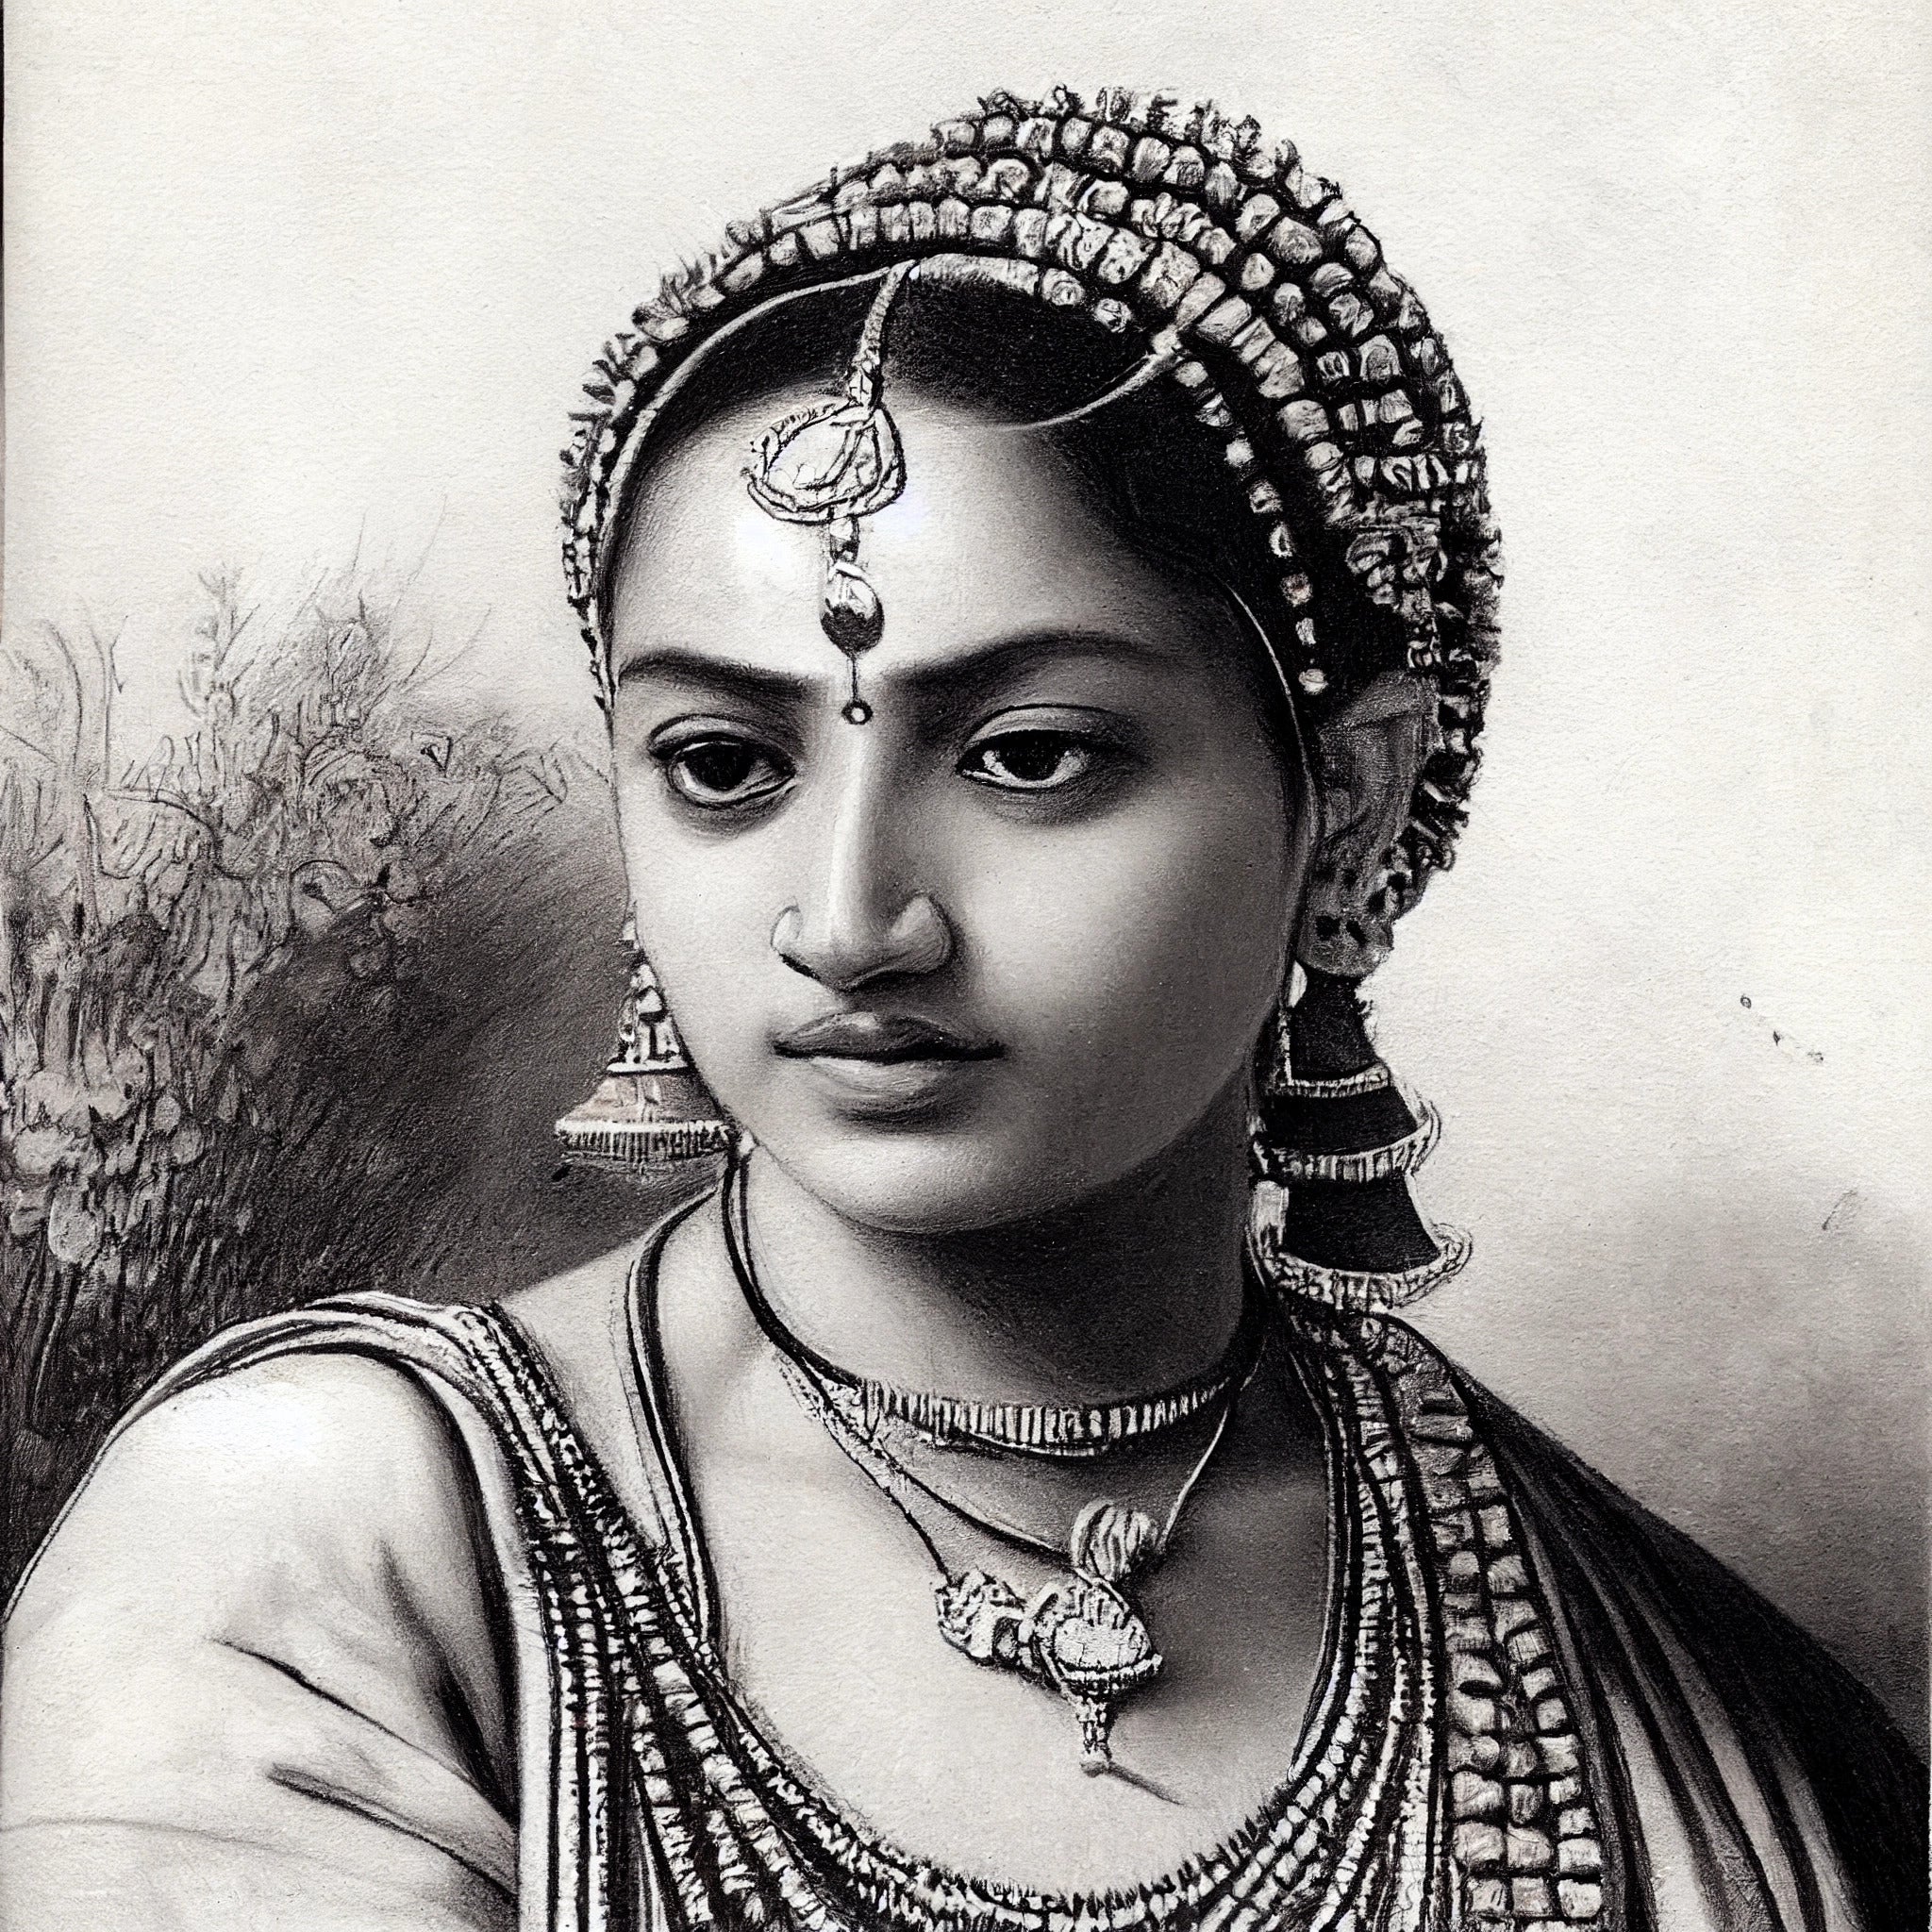 "Timeless Beauty: Black-and-White Portrait print of an Indian Woman in Traditional Attire"